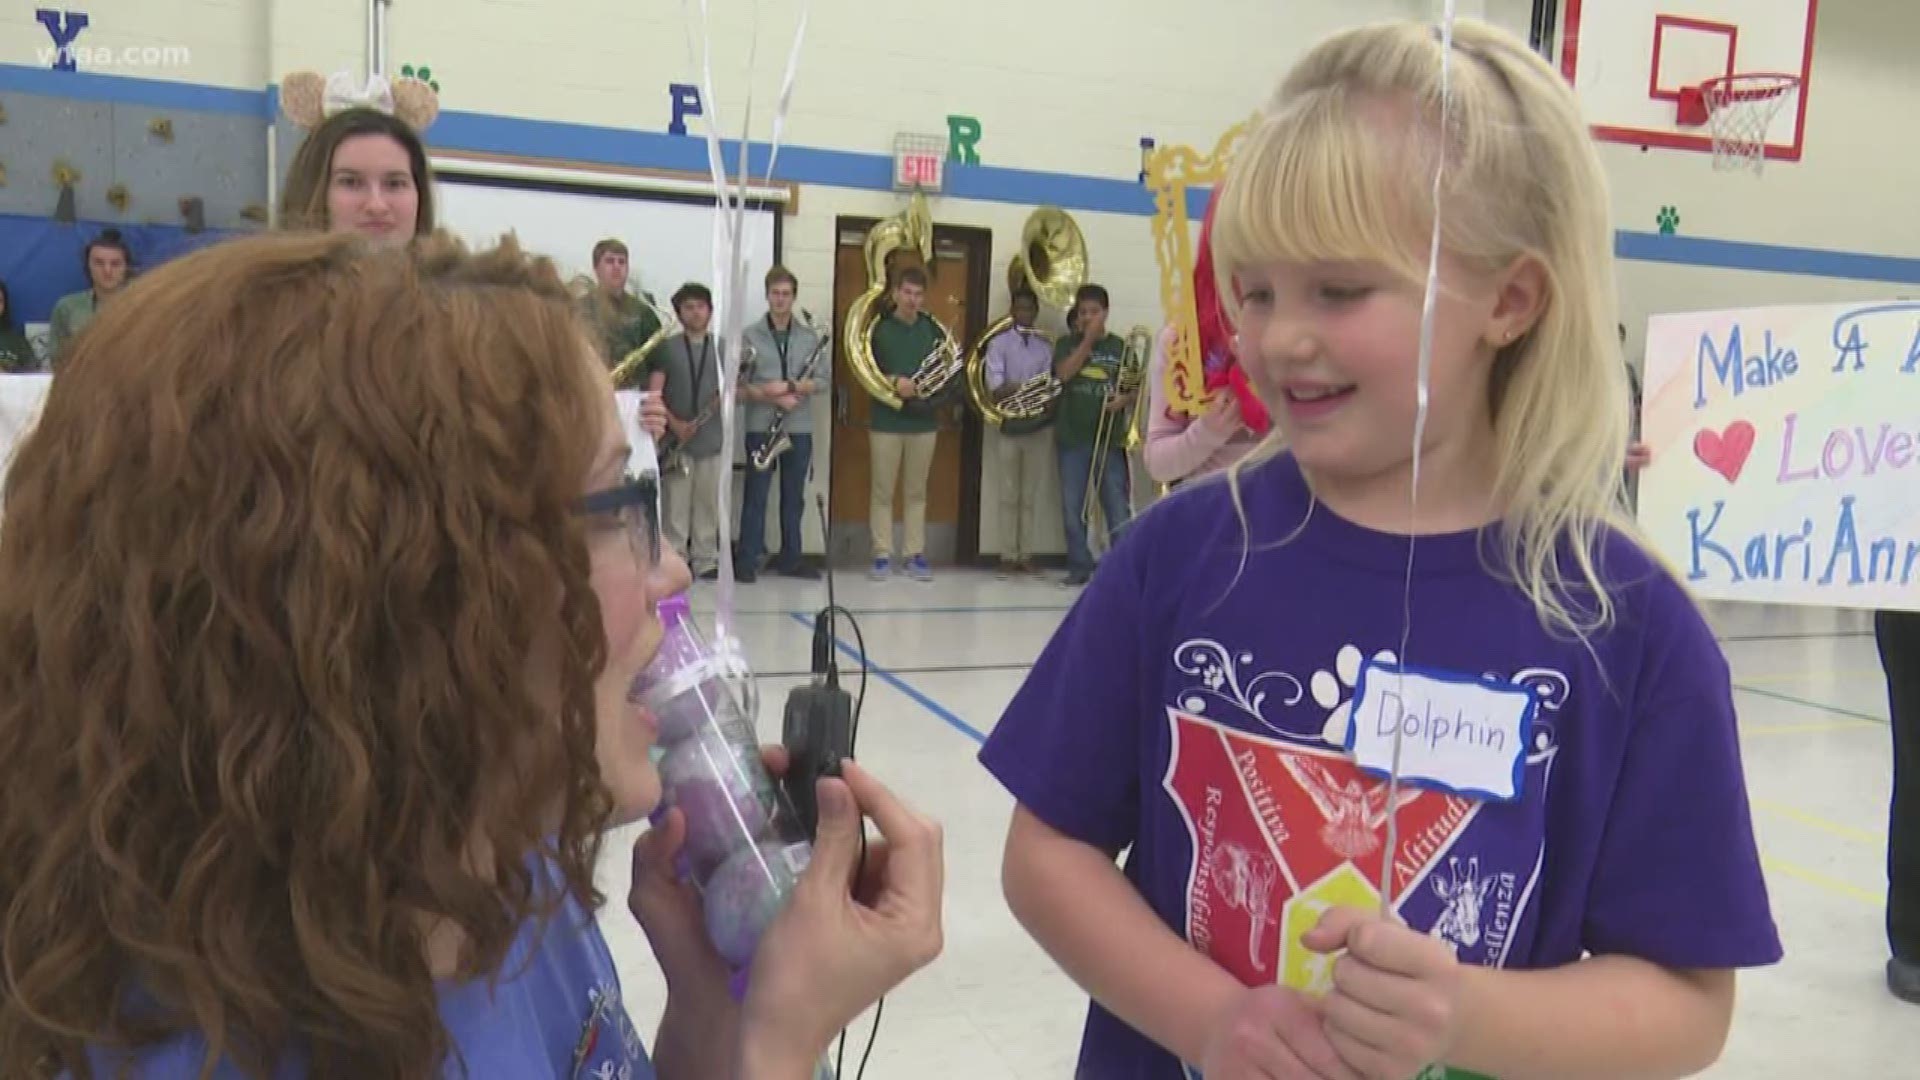 Make-A-Wish grants wish for Dallas girl, who wished for the same thing as her older sister